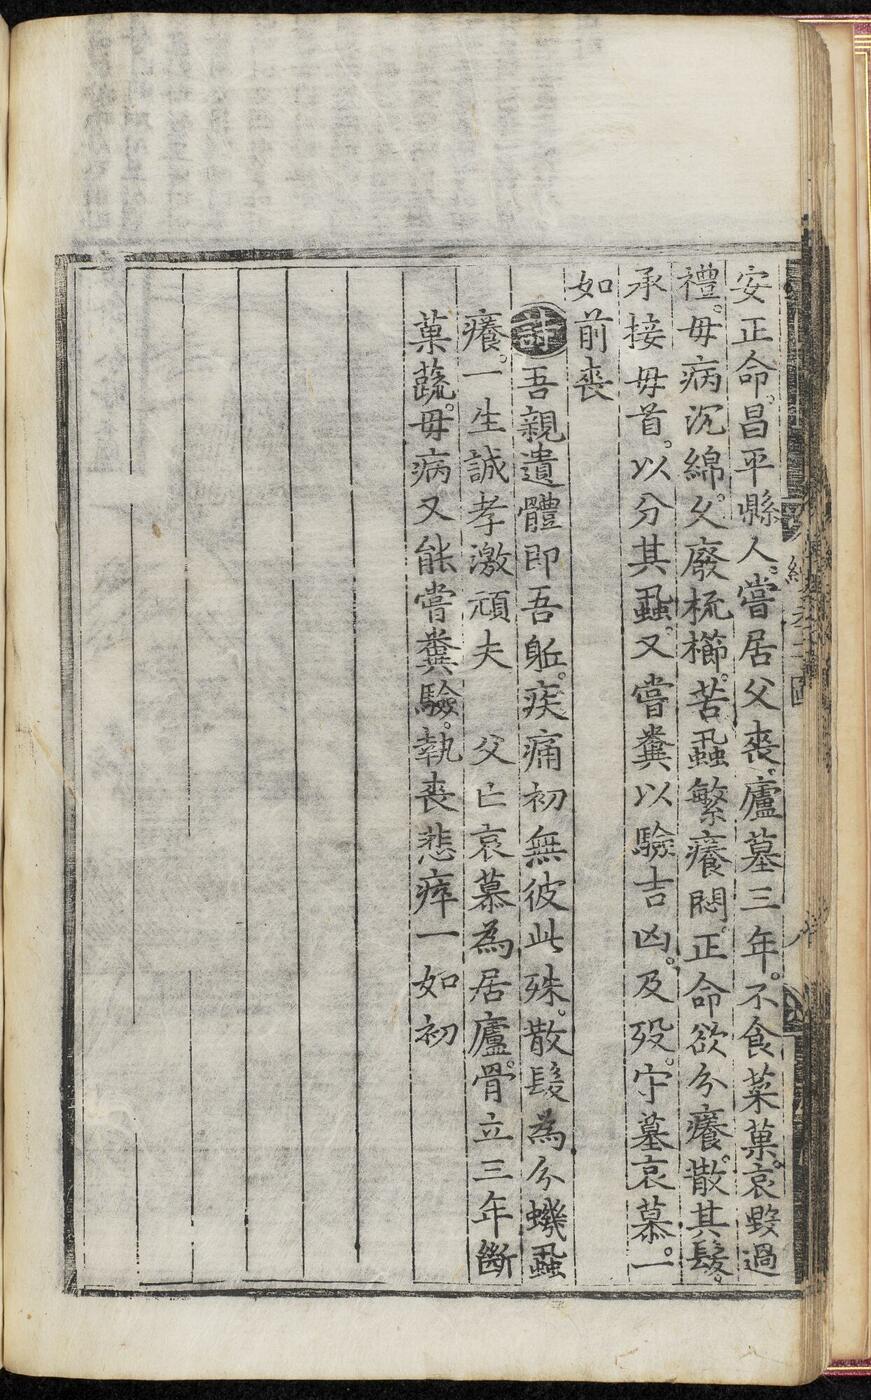 Illustrated Proper Conduct According to the Three Confucian Principles, c1570